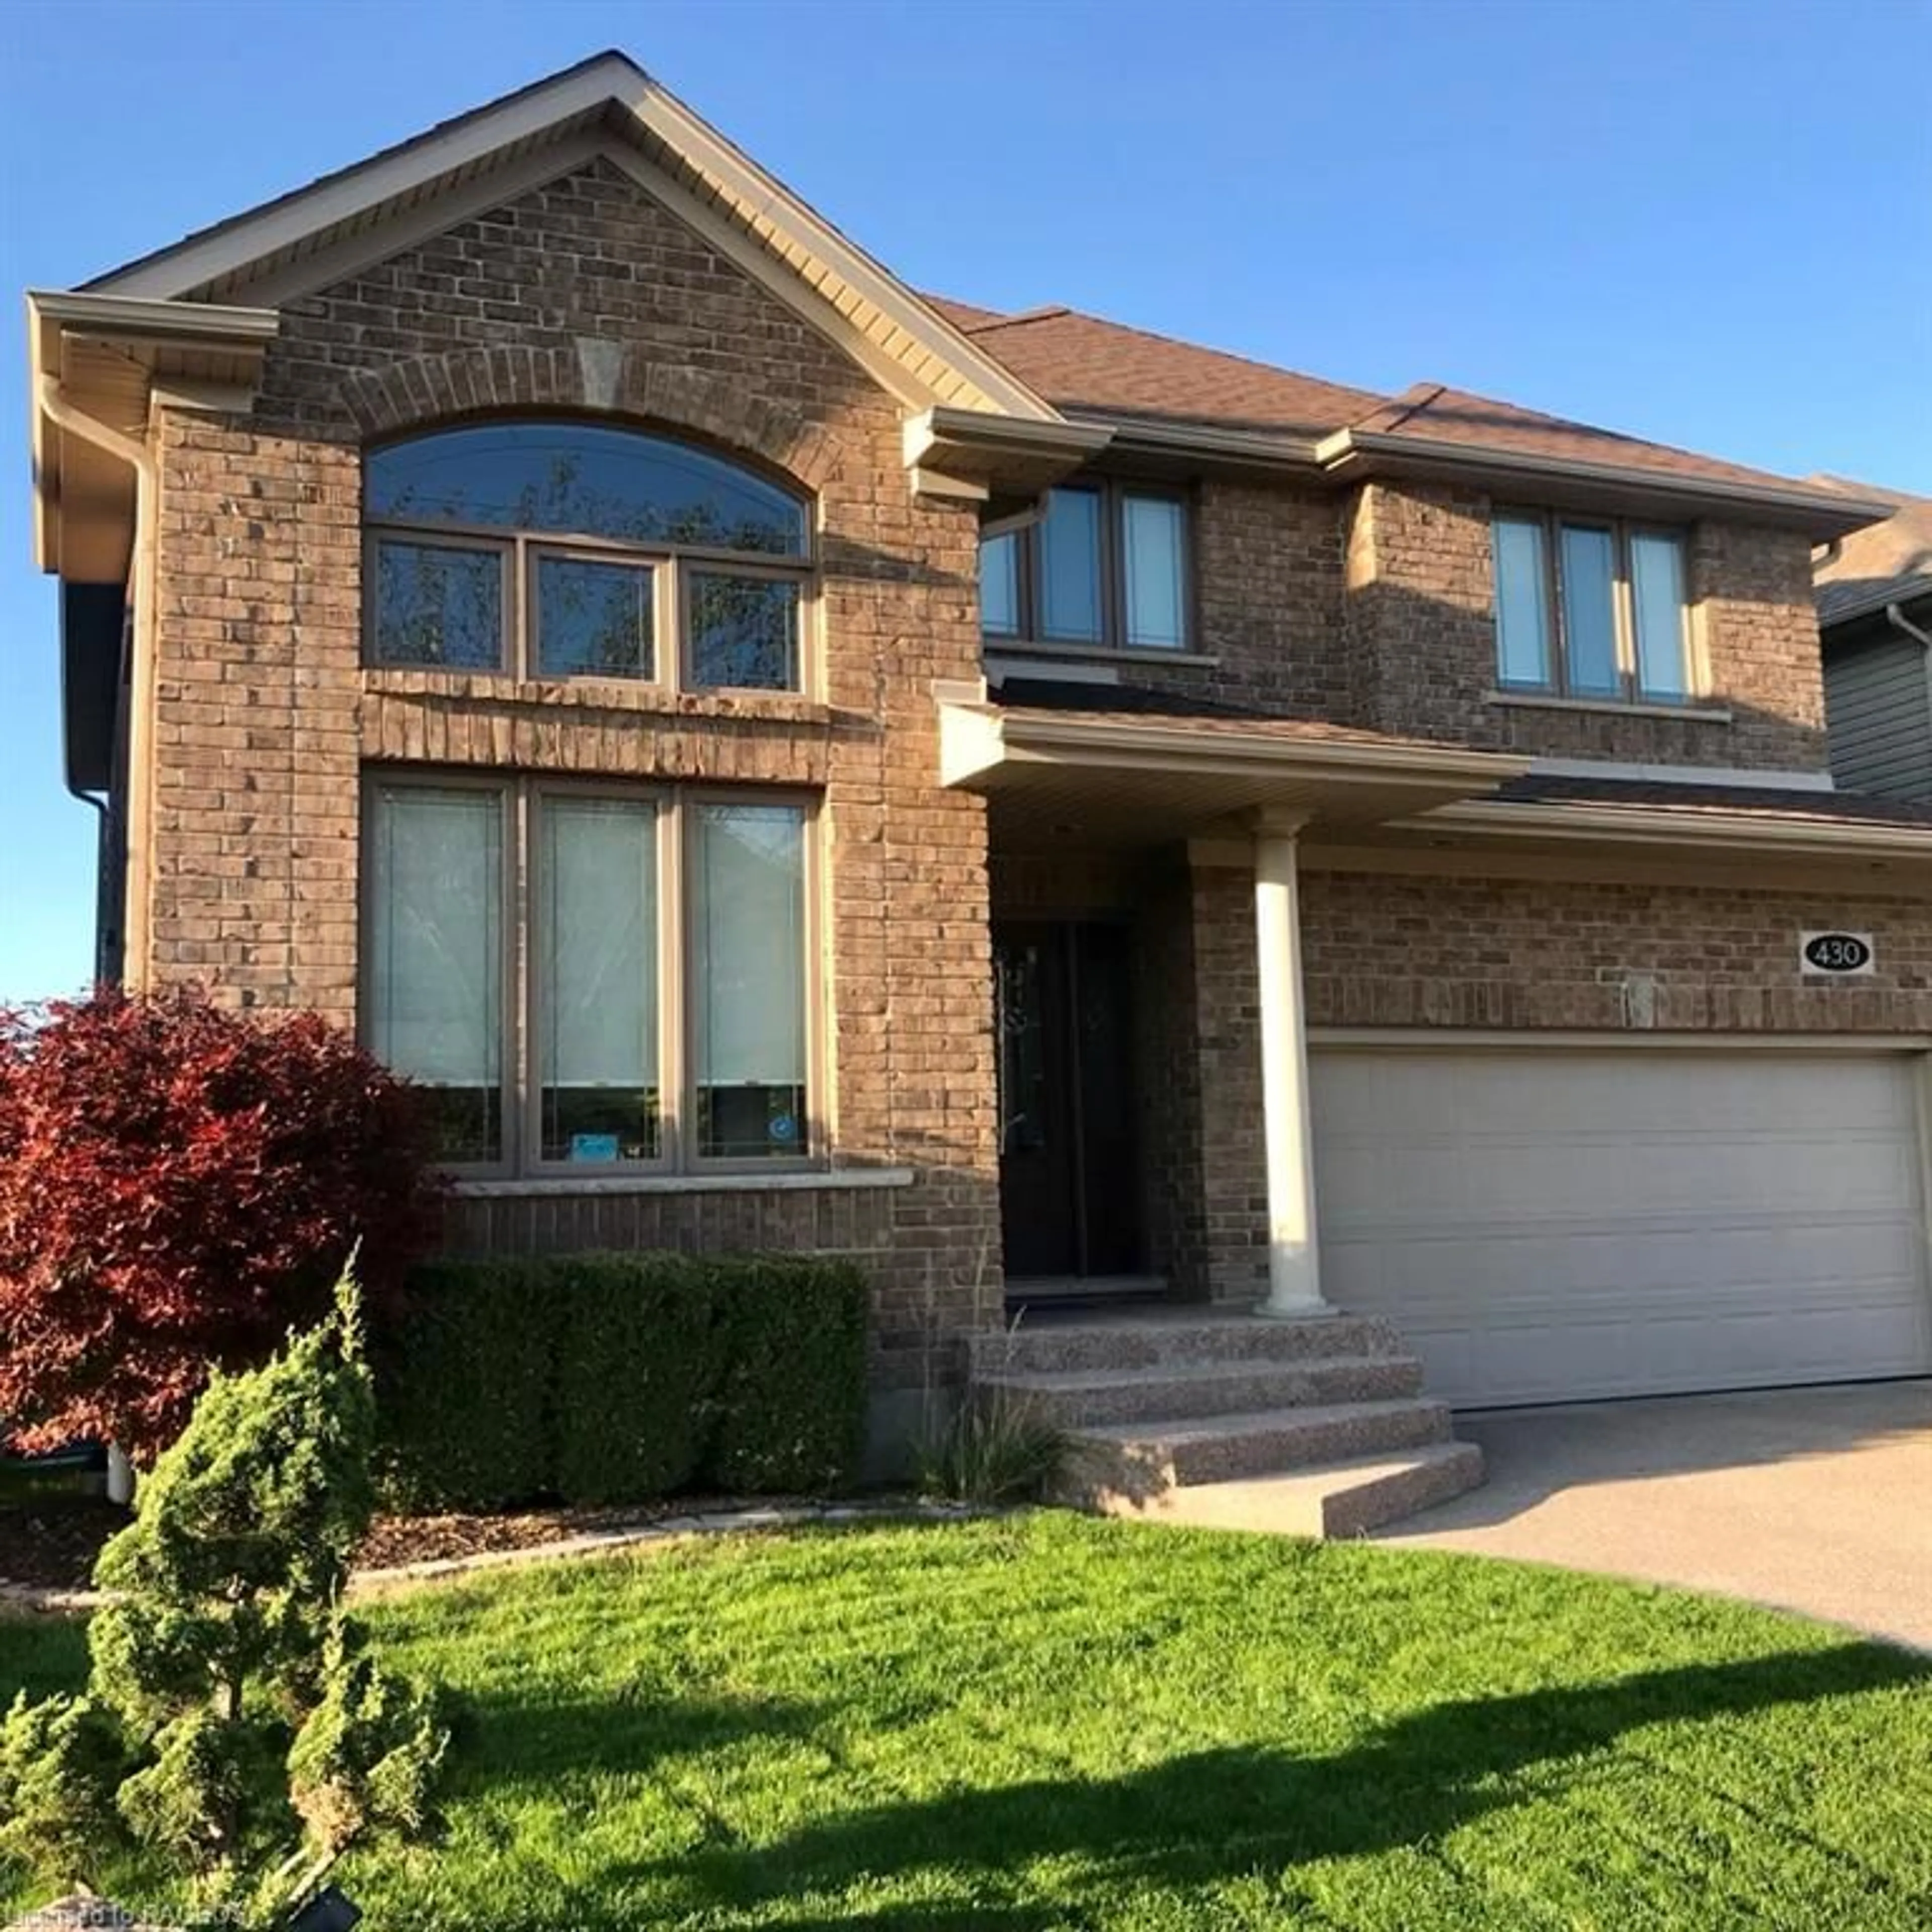 Home with brick exterior material for 430 Rideau River St, Waterloo Ontario N2V 2Y4